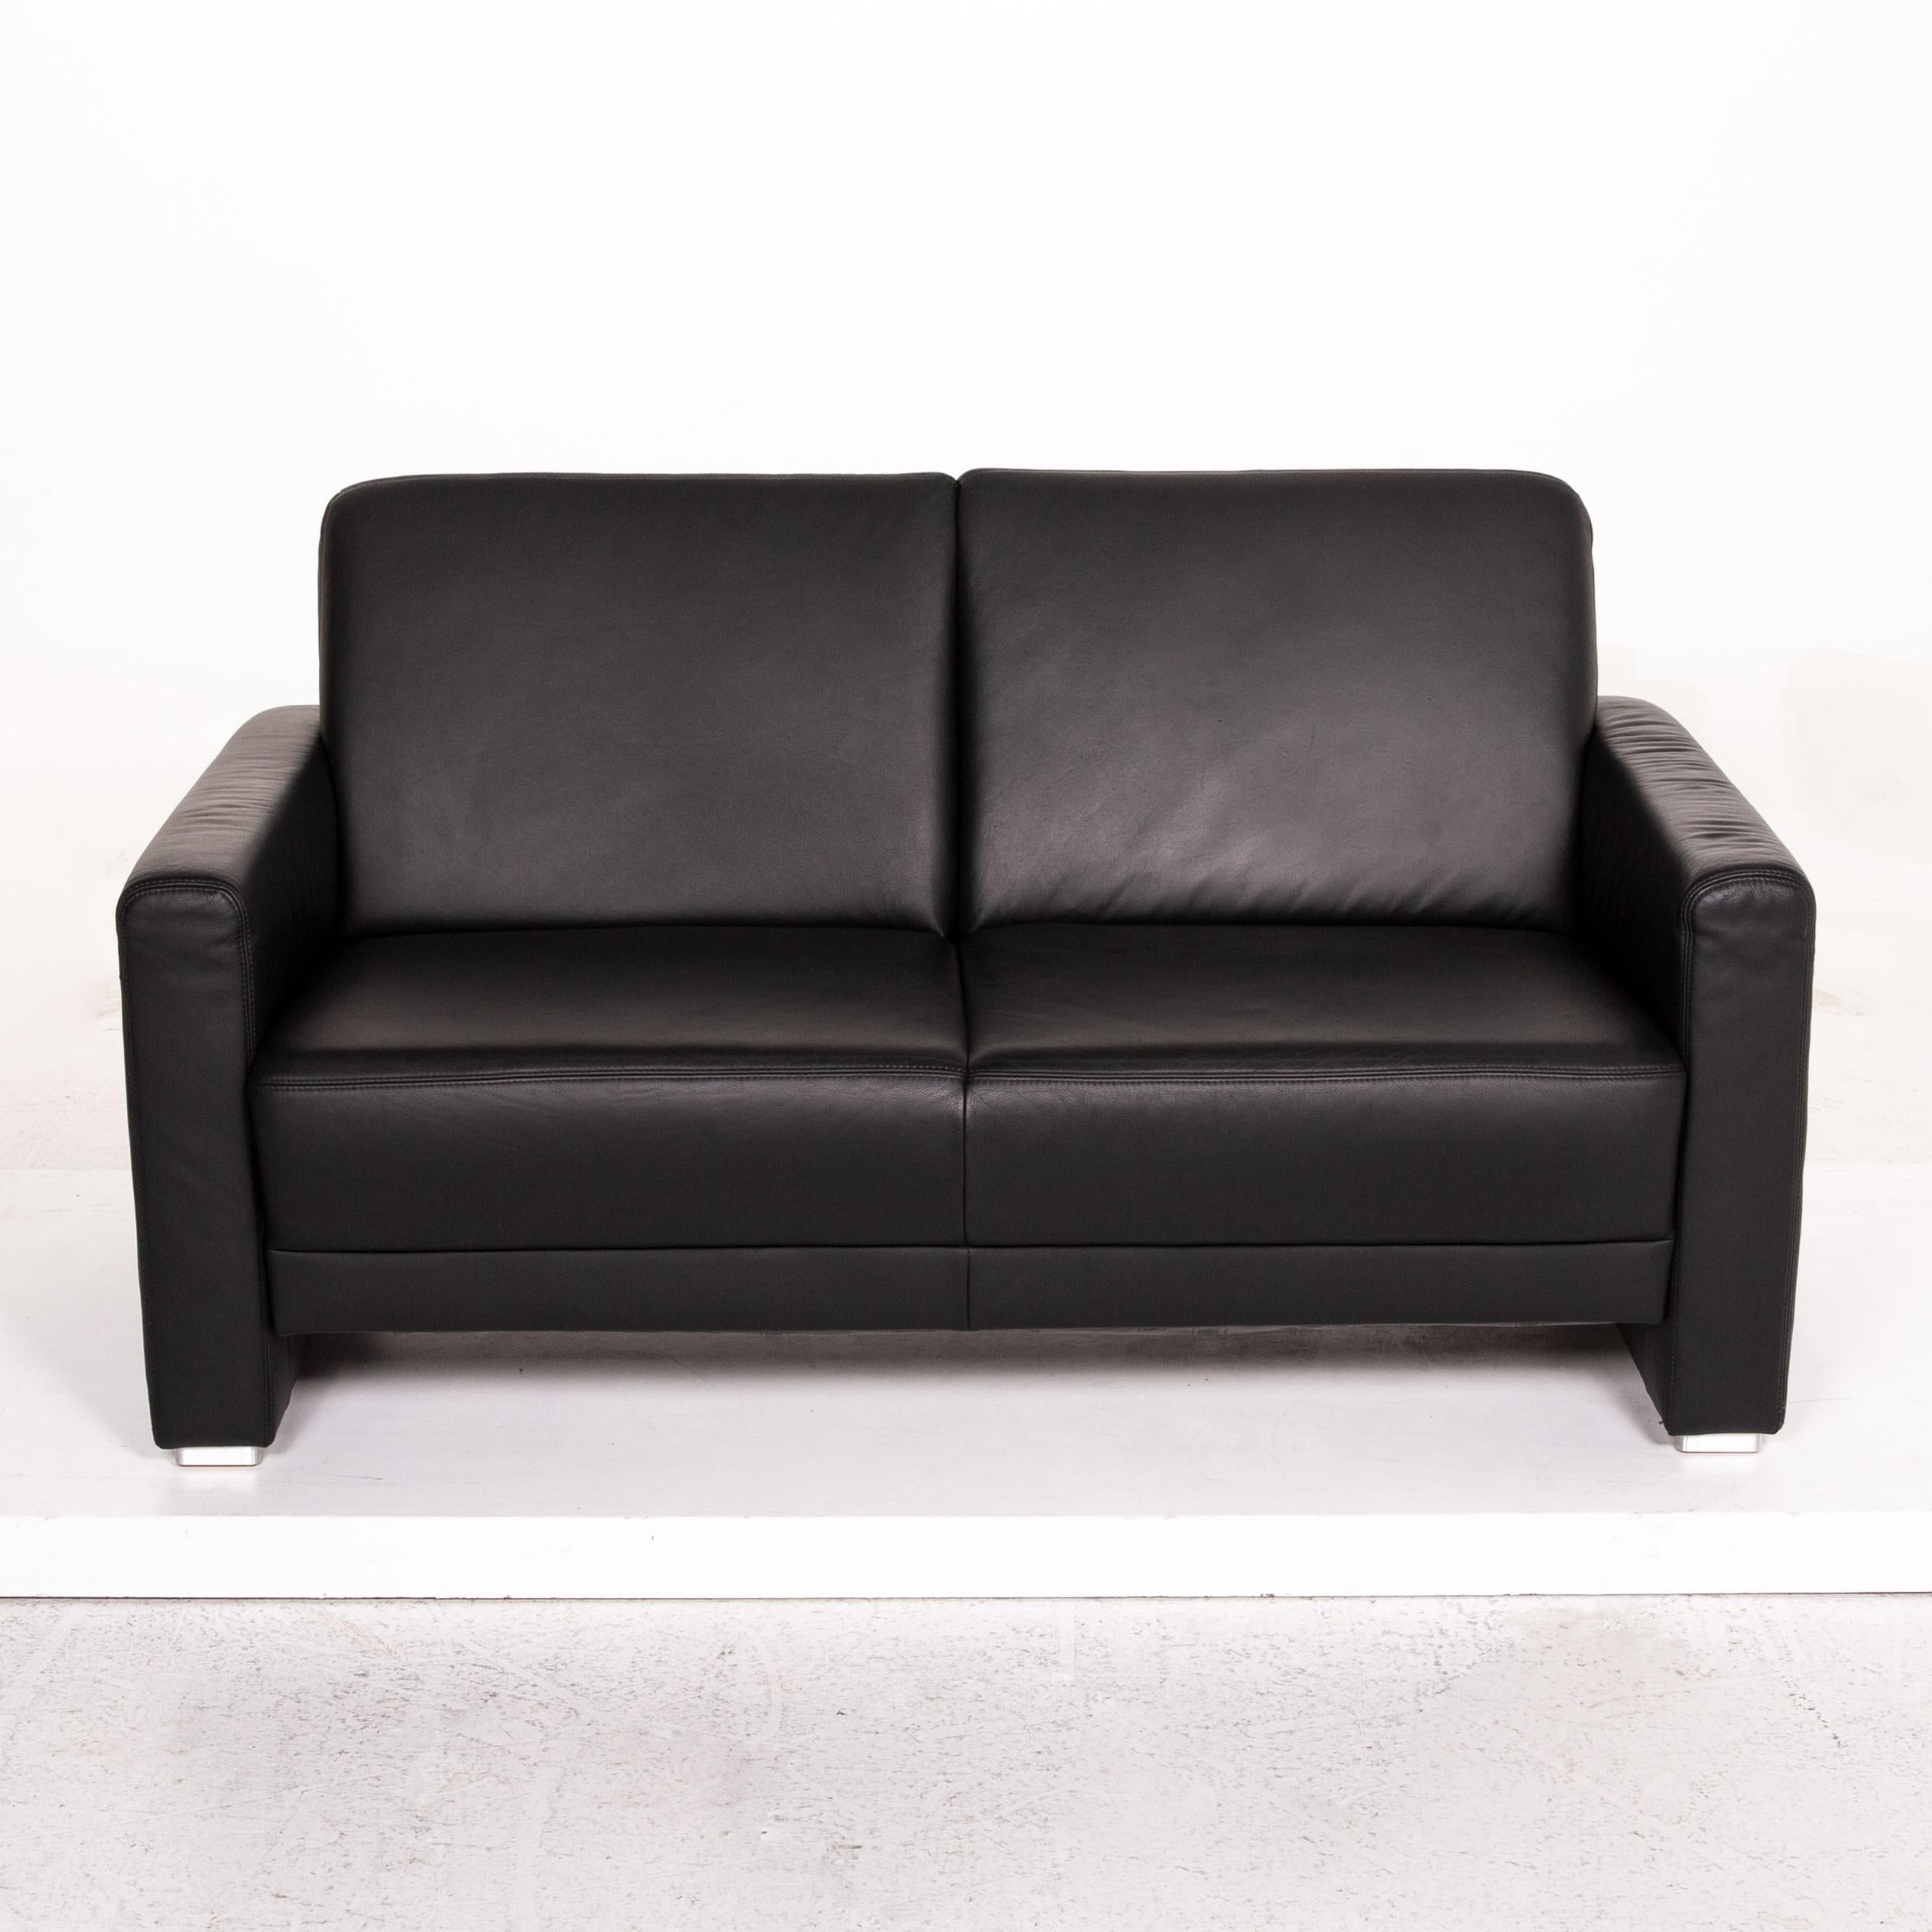 Sample Ring Leather Sofa Set Black 1 Three-Seat 1 Two-Seat Couch For Sale 3